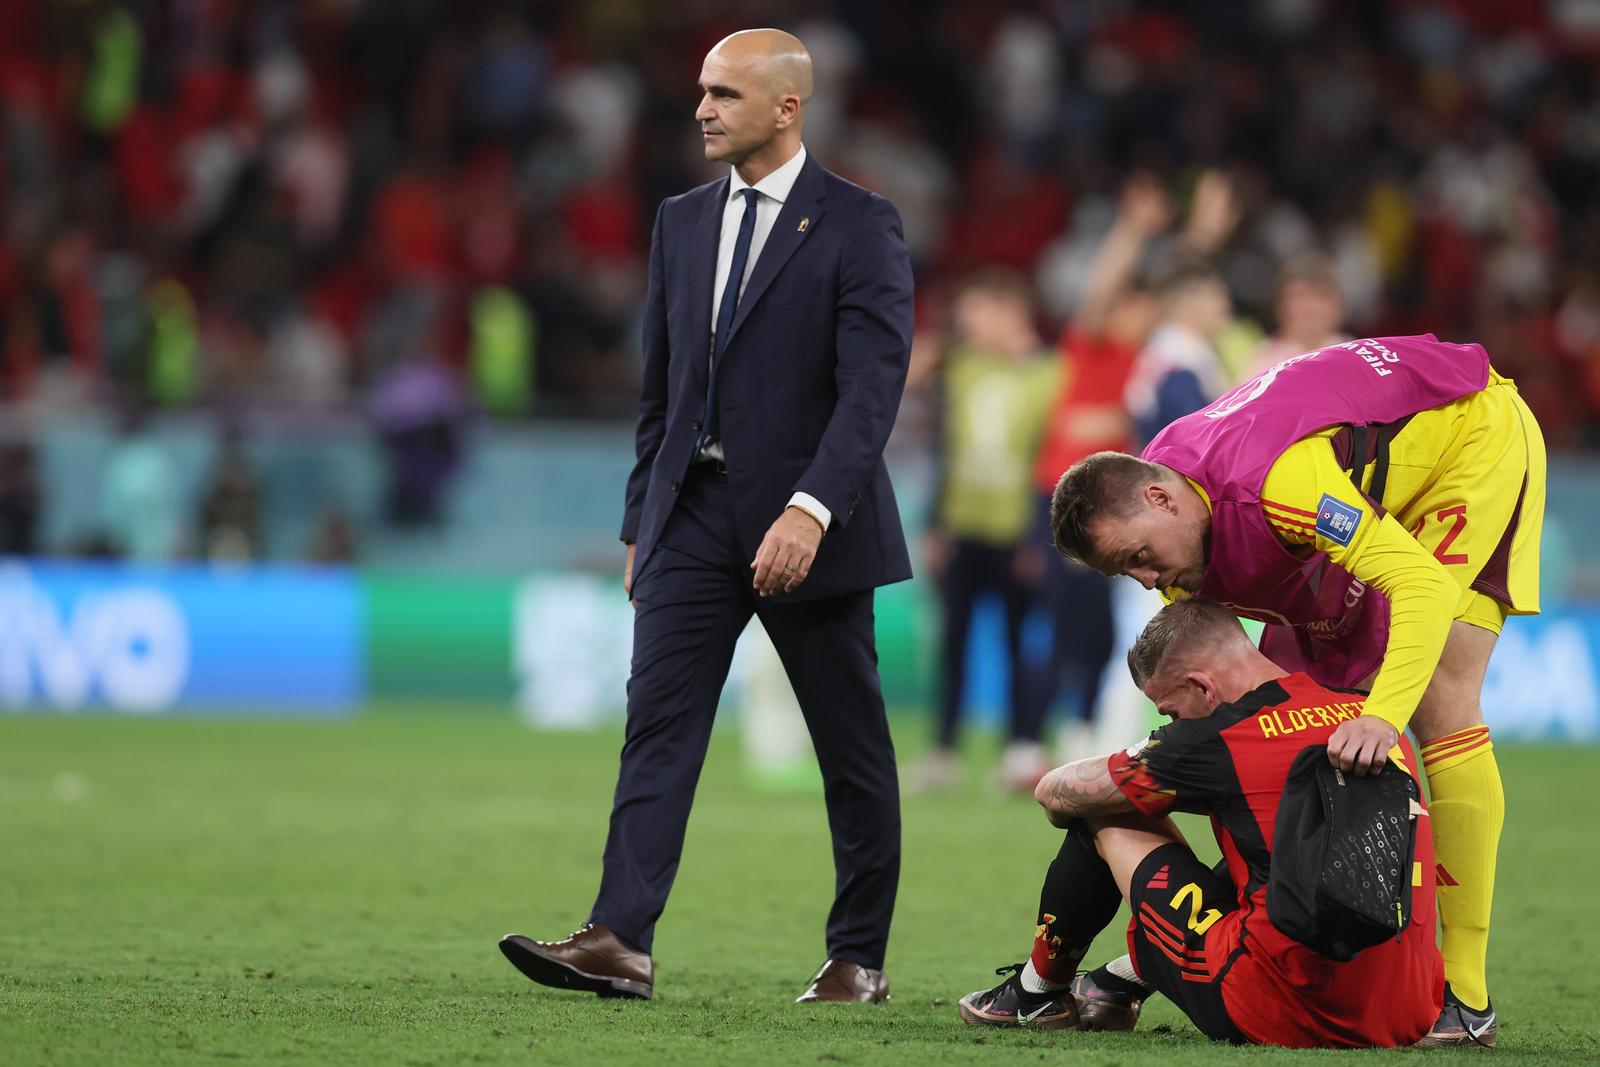 Belgium's head coach Roberto Martinez, Belgium's Toby Alderweireld and Belgium's goalkeeper Simon Mignolet show defeat after they lost a soccer game between Belgium's national team the Red Devils and Croatia, the third and last game in Group F of the FIFA 2022 World Cup in Al Rayyan, State of Qatar on Thursday 01 December 2022.
 BELGA PHOTO BRUNO FAHY Photo: BRUNO FAHY/PIXSELL